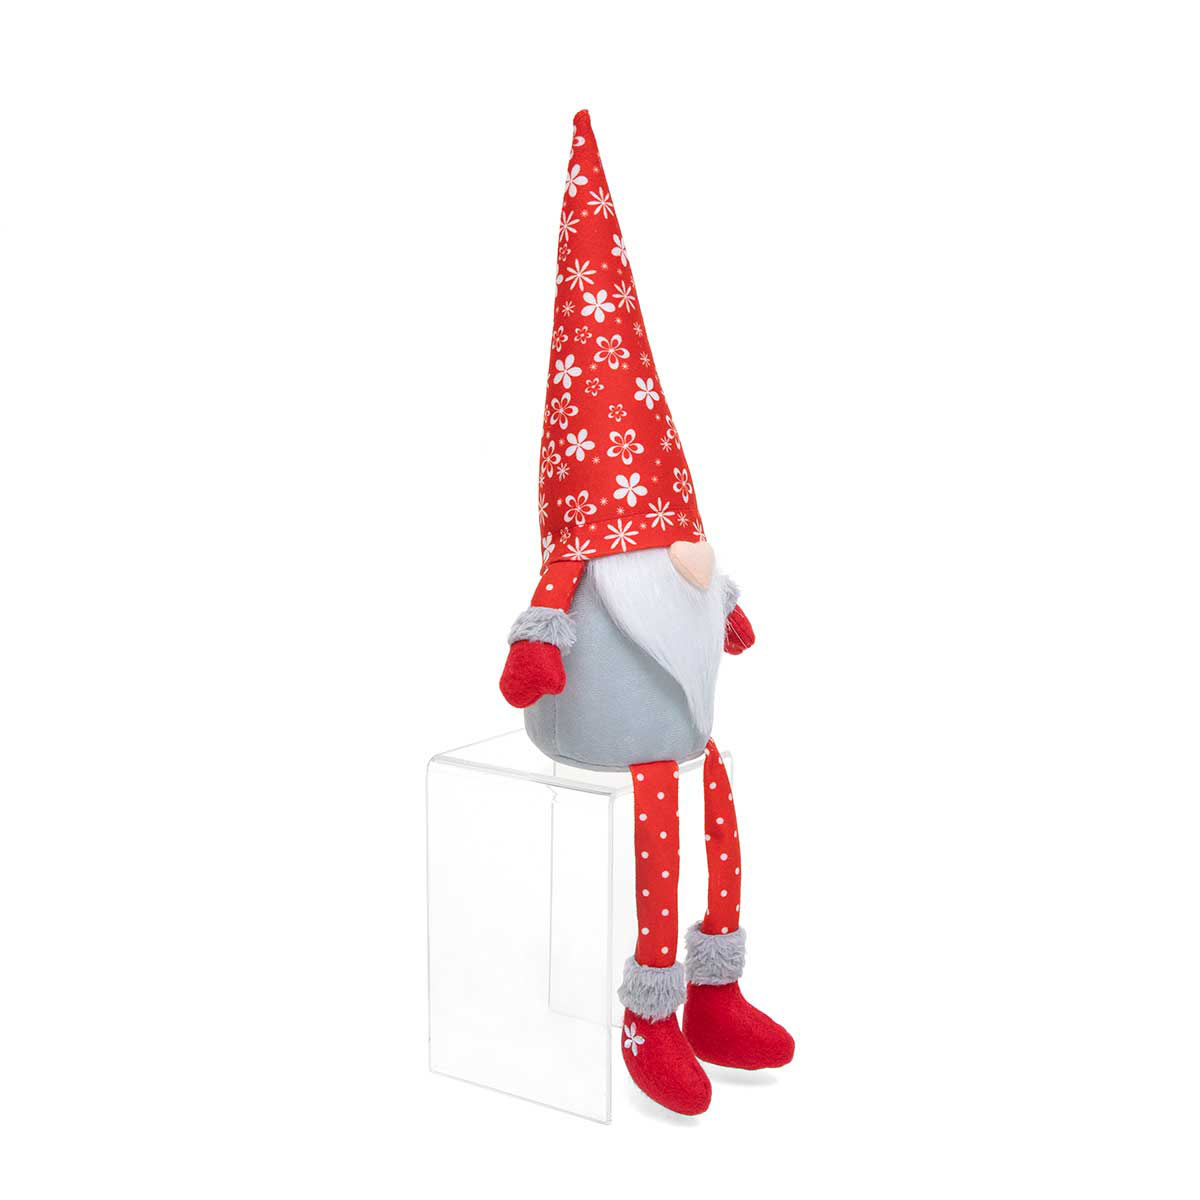 b70 GNOME FLORAL HAT WITH LEGS LA 4.75IN X 3.5IN X 17.5IN RED